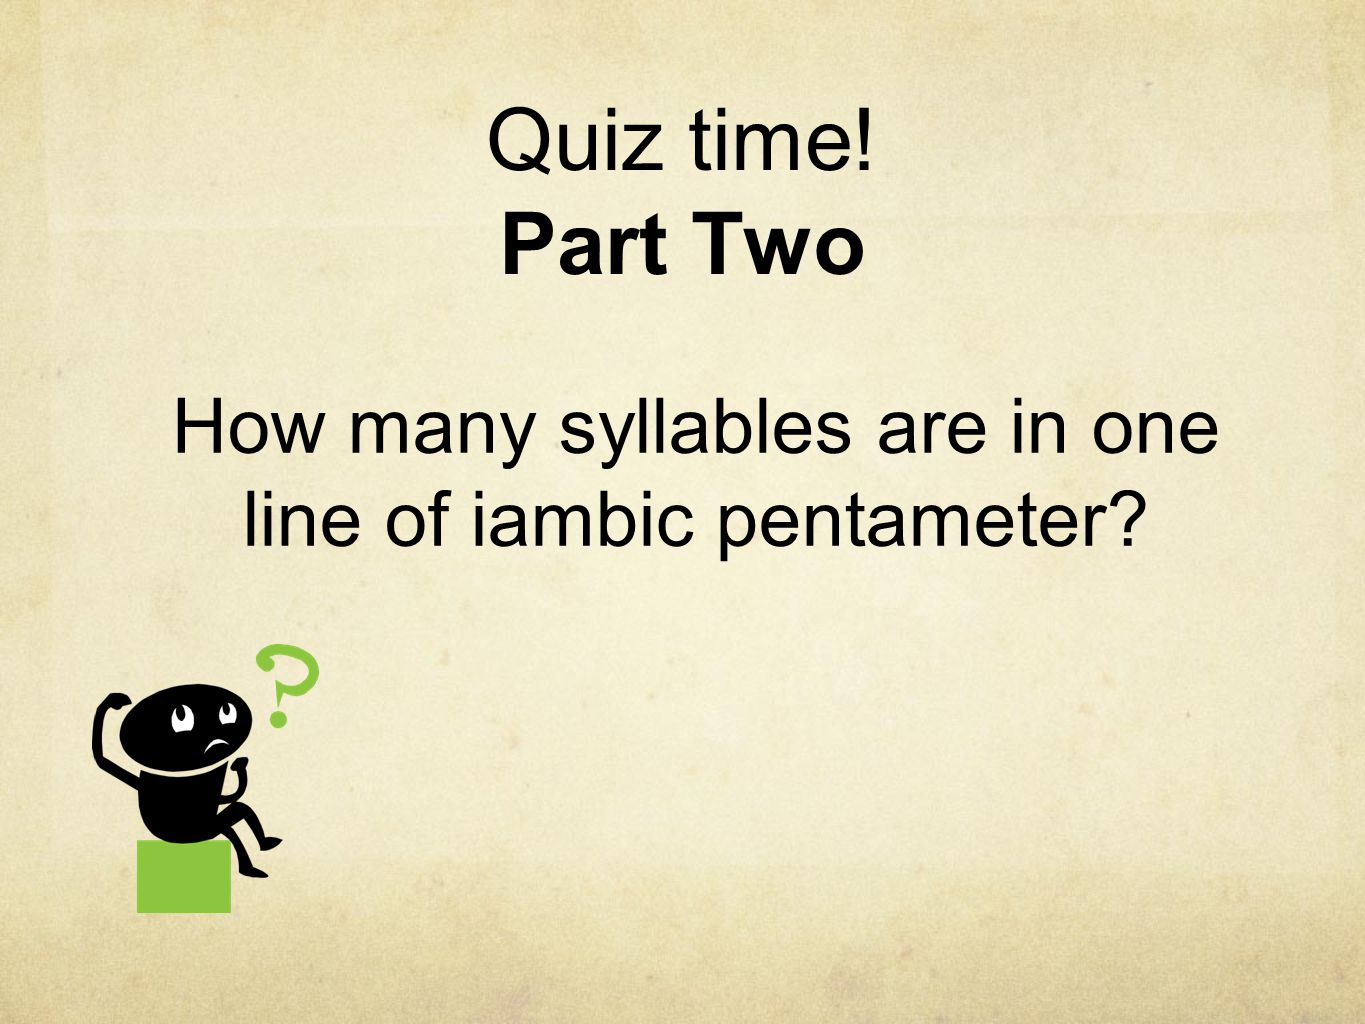 How many syllables are in one line of iambic pentameter